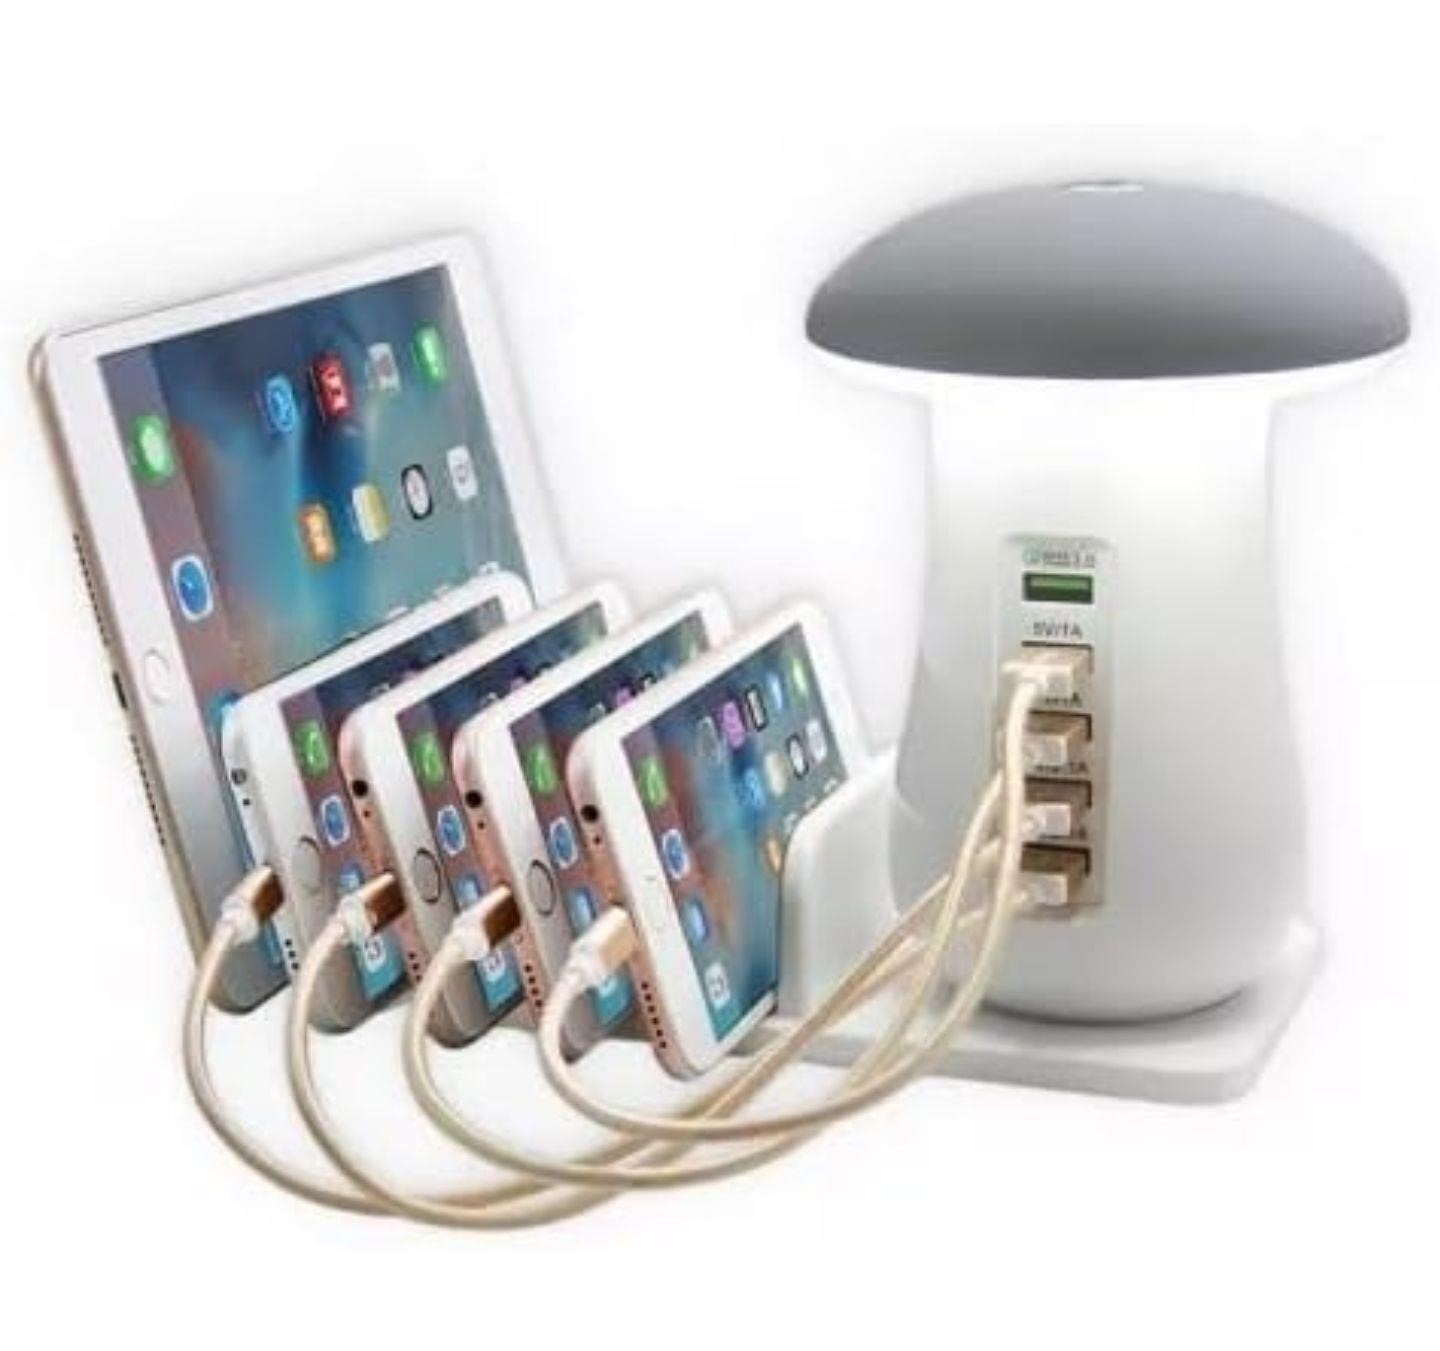 ($85) 5-Port USB Charging Station with M